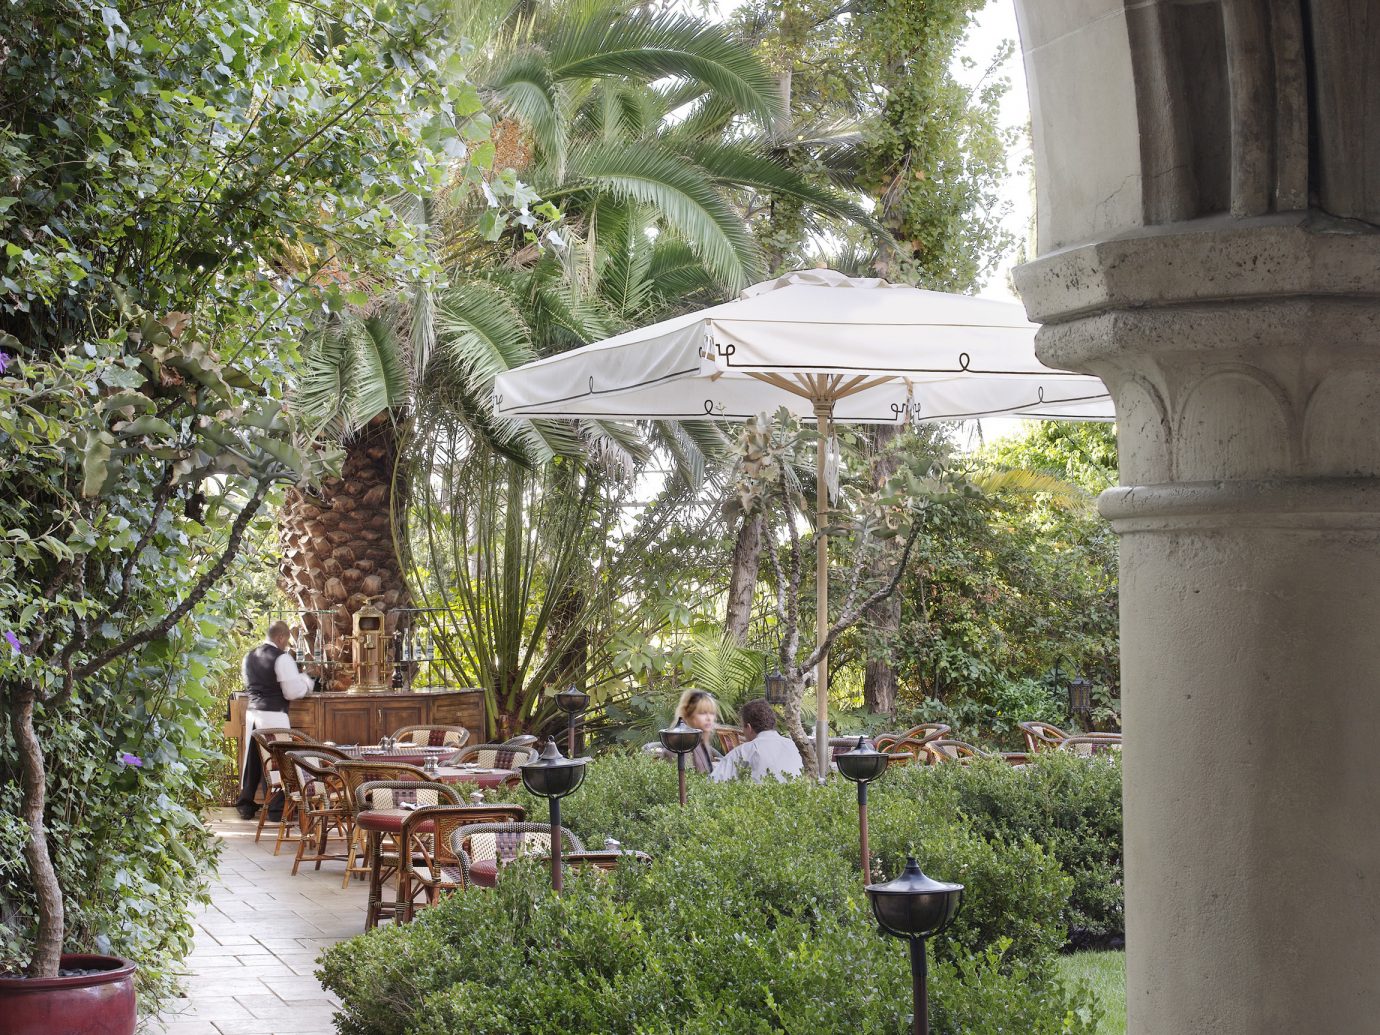 Outdoor dining at Chateau Marmont, LA